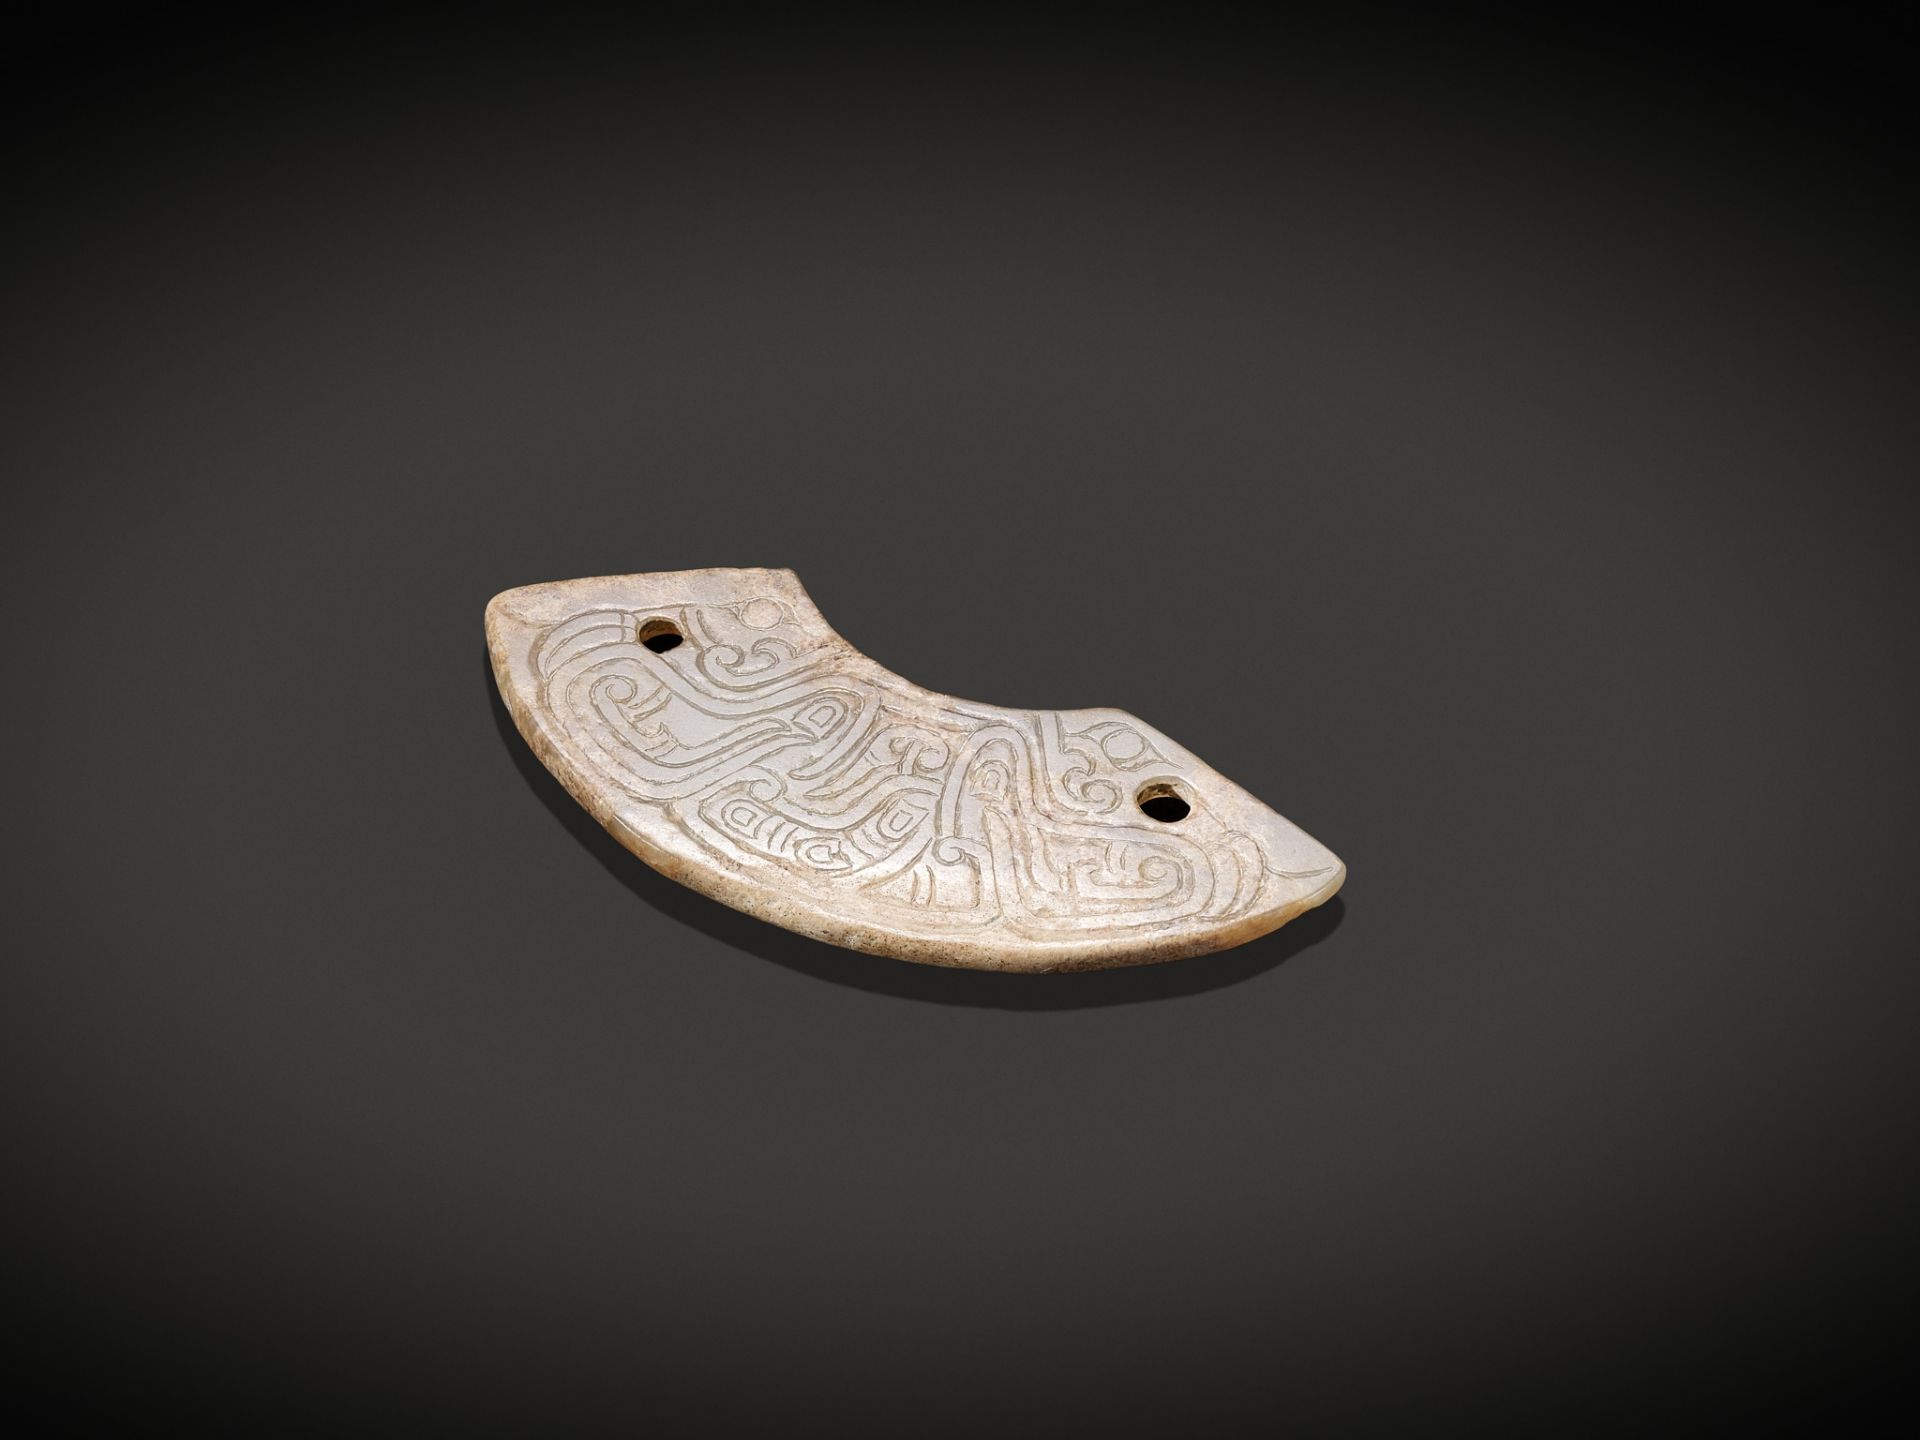 A JADE 'DRAGON' PENDANT, HUANG, WESTERN ZHOU DYNASTY - Image 14 of 17